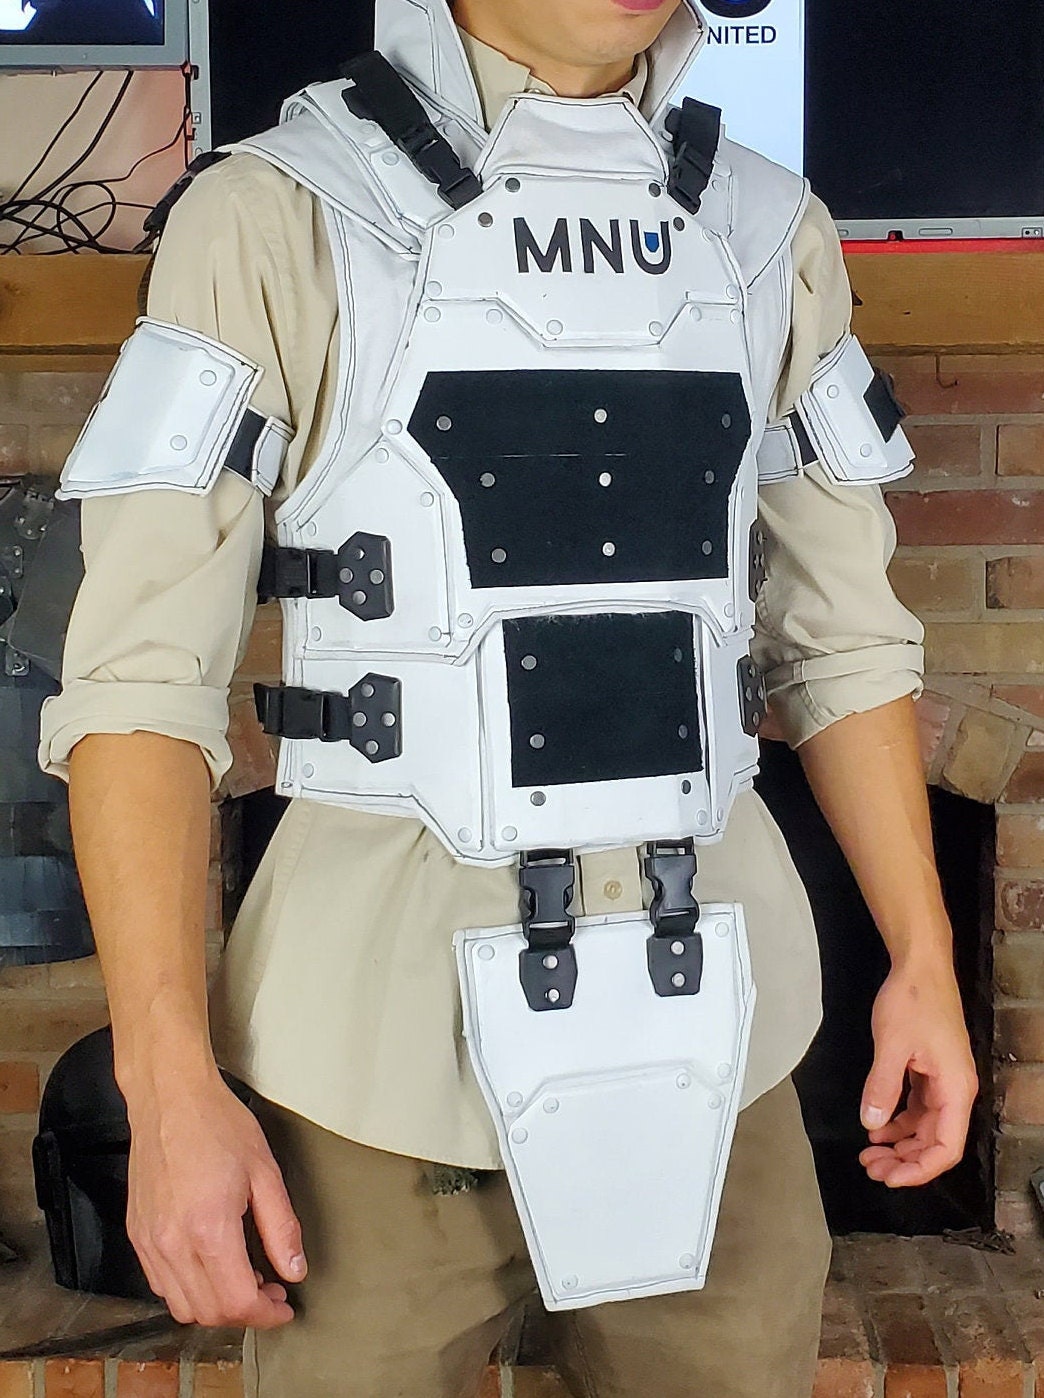 District 9 cosplay